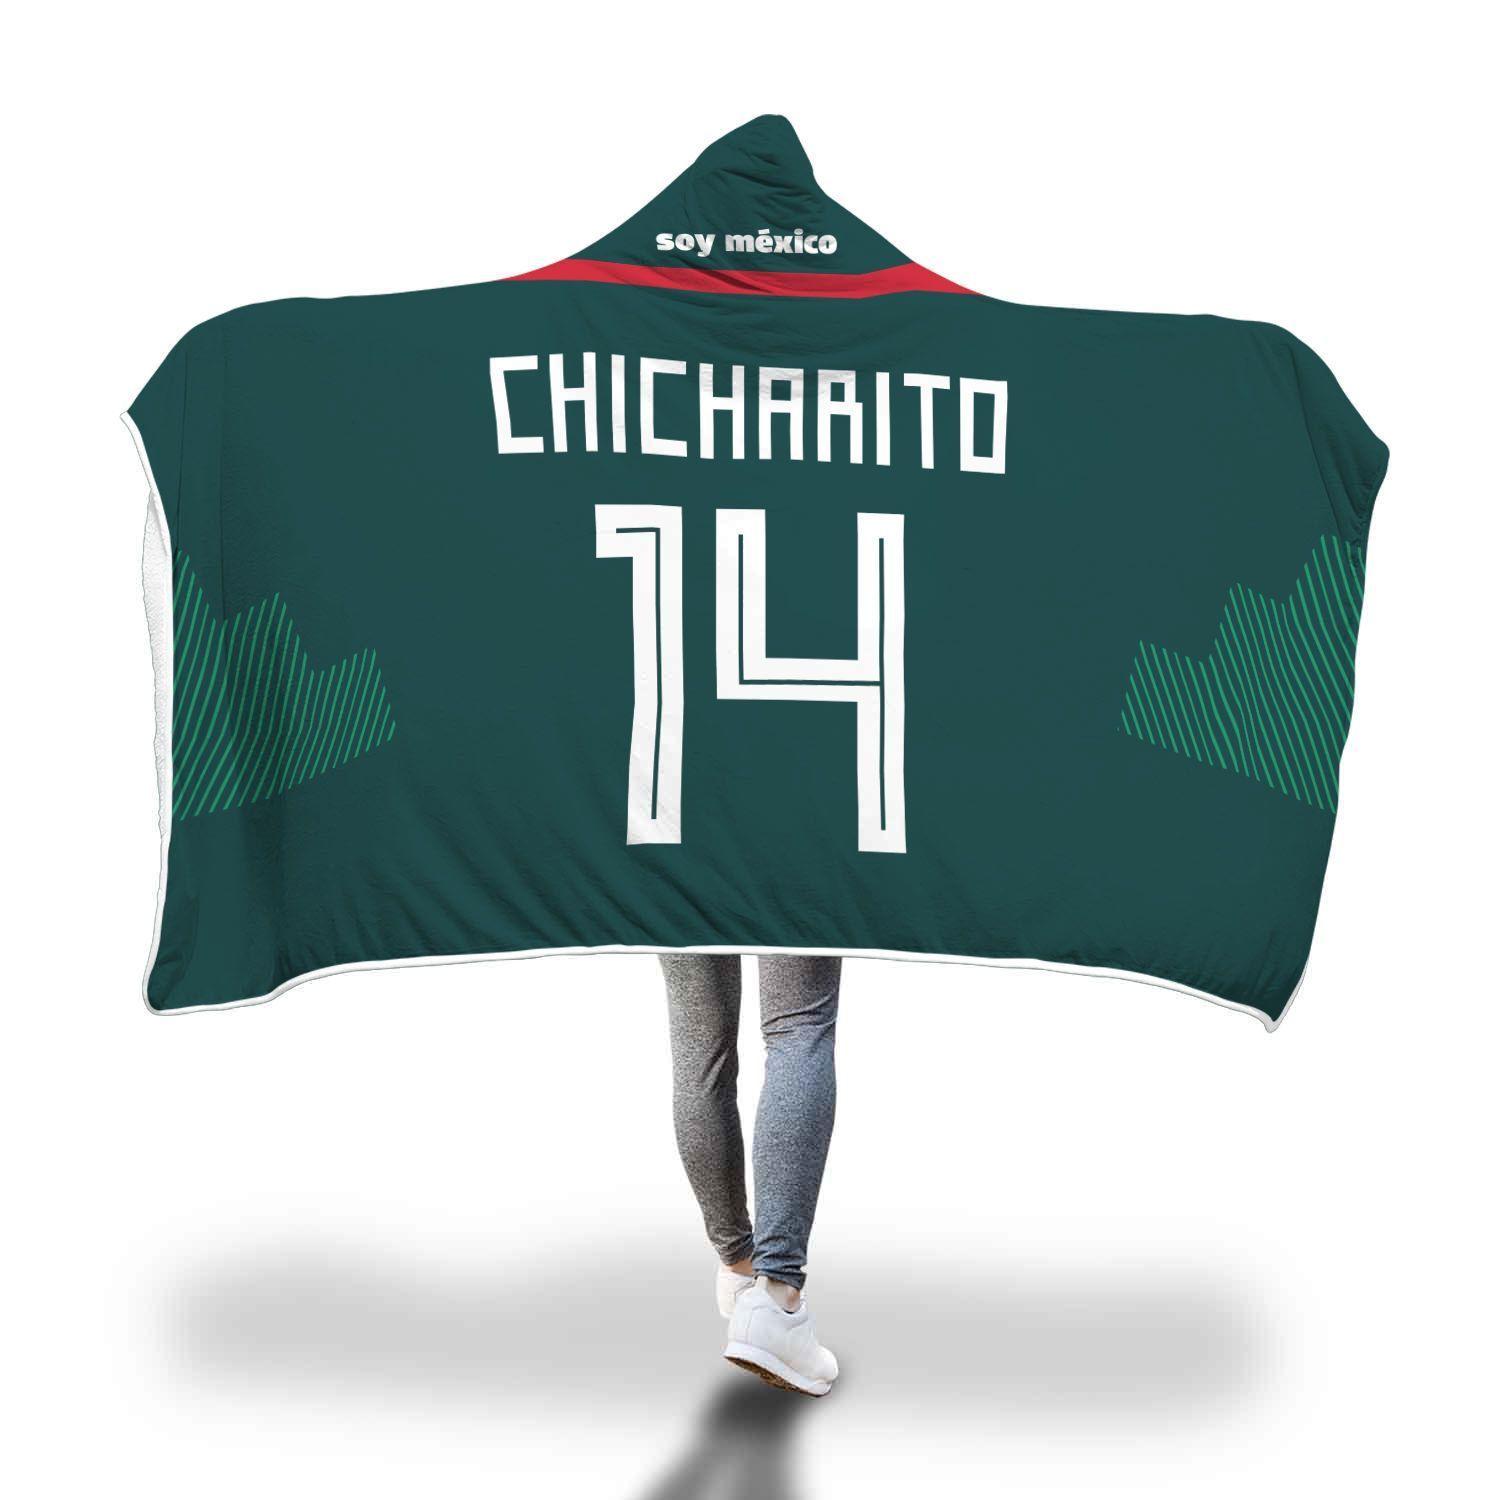 Chicharito Logo - Javier Chicharito Mexico Home Jersey 2018 Hooded Blanket World Cup